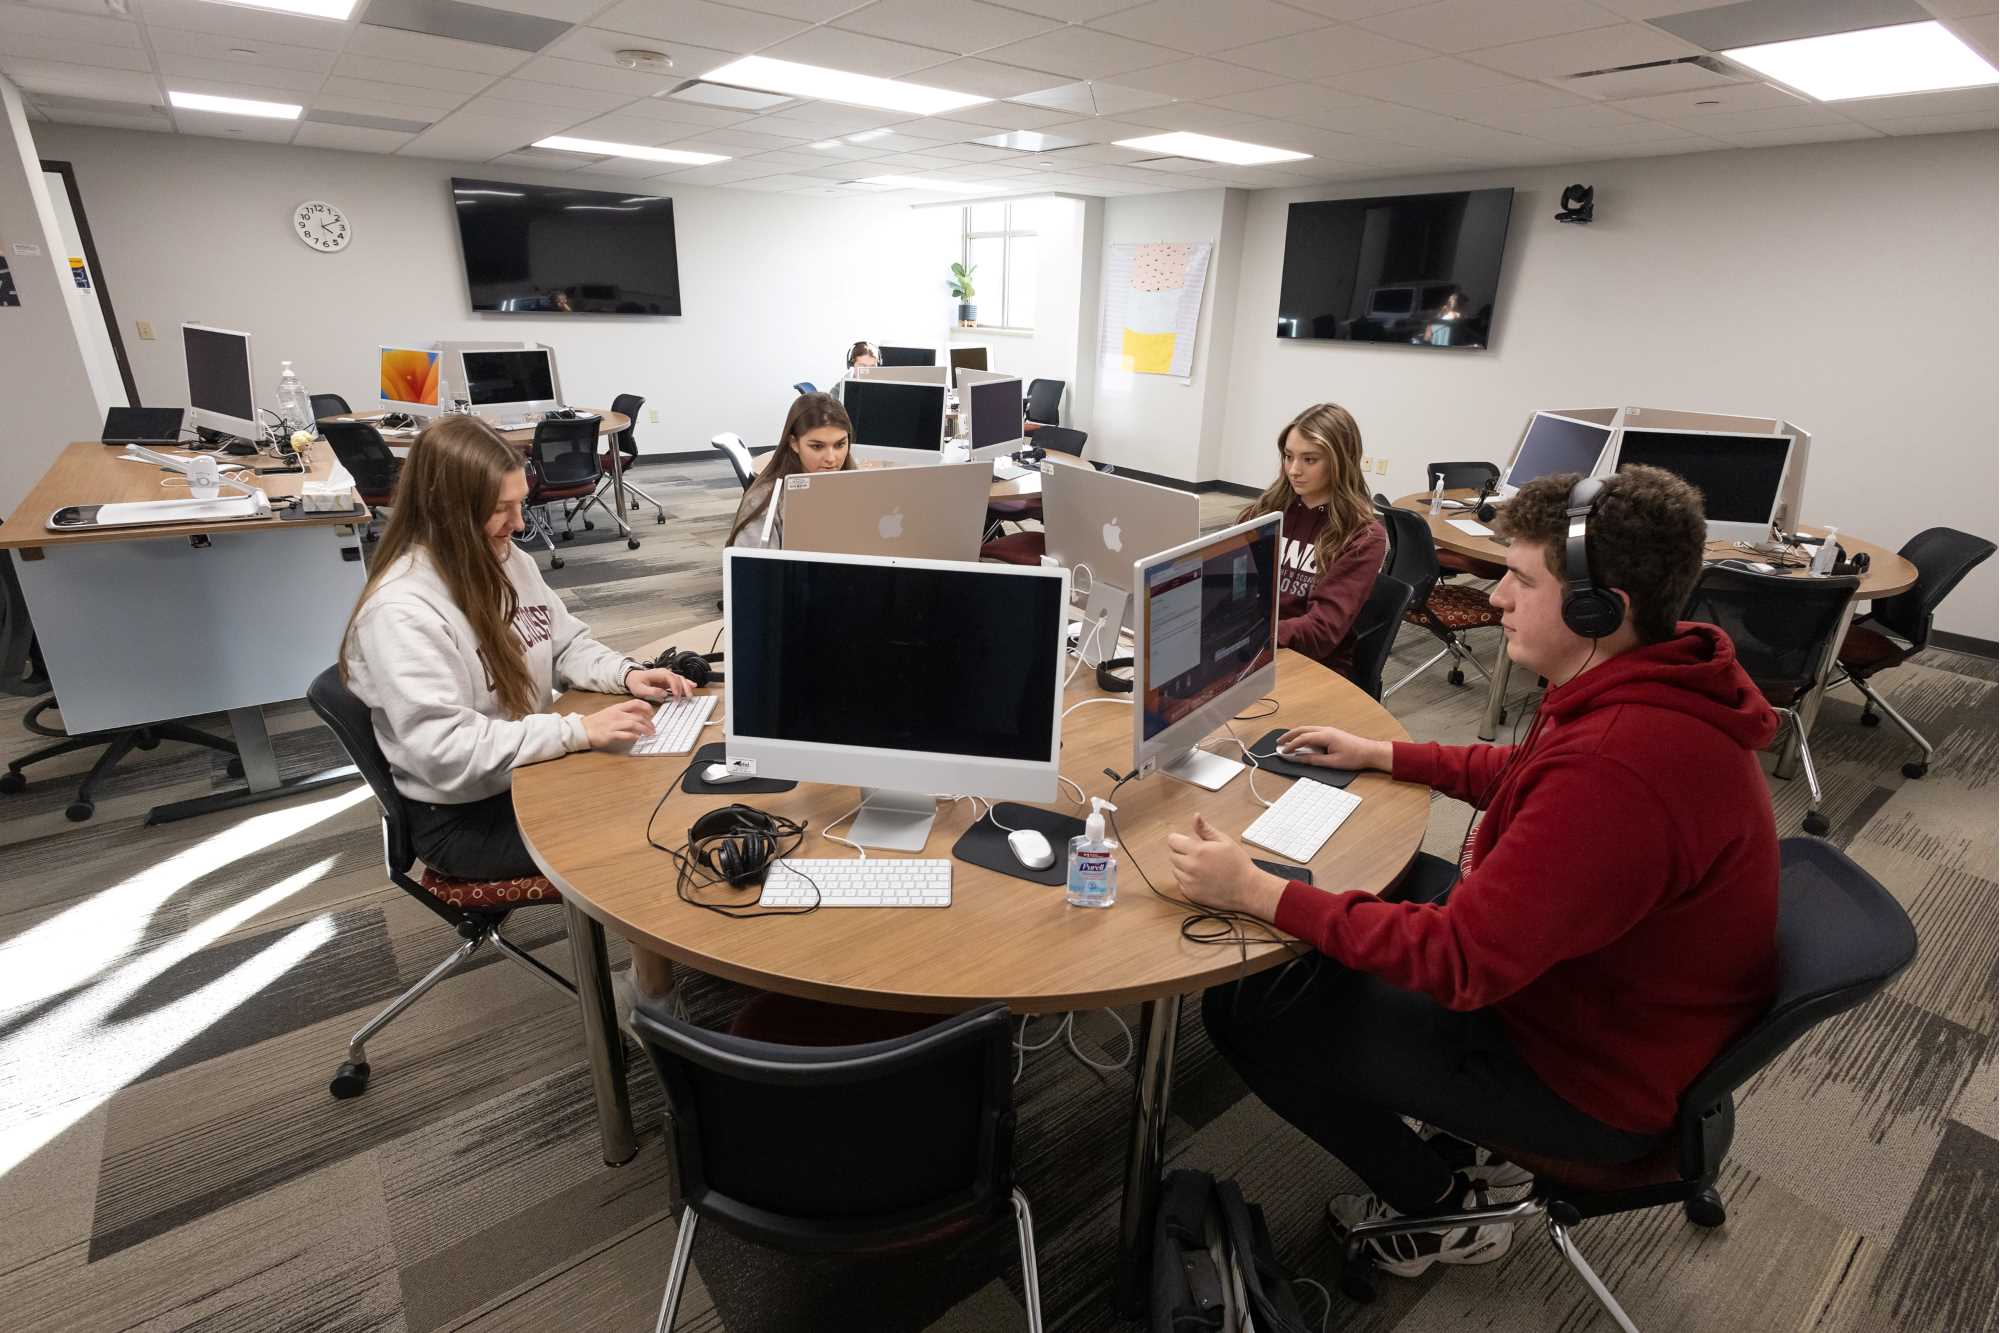 The new Communication and Media Lab (CaML) offers CASSH students and faculty a space for research and production using new and emerging digital media technologies.